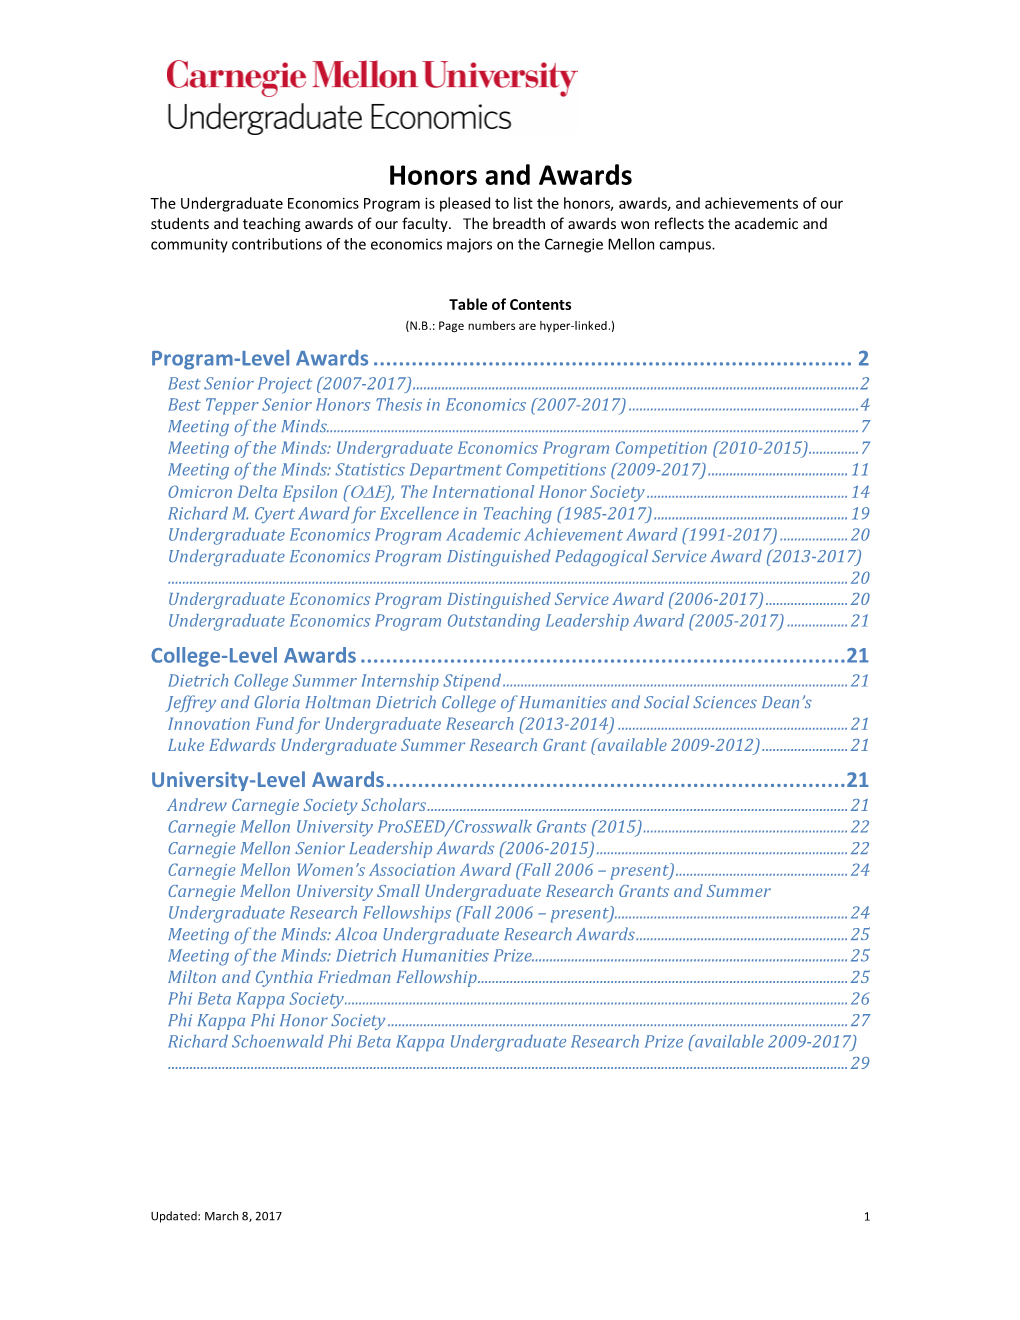 Honors and Awards the Undergraduate Economics Program Is Pleased to List the Honors, Awards, and Achievements of Our Students and Teaching Awards of Our Faculty